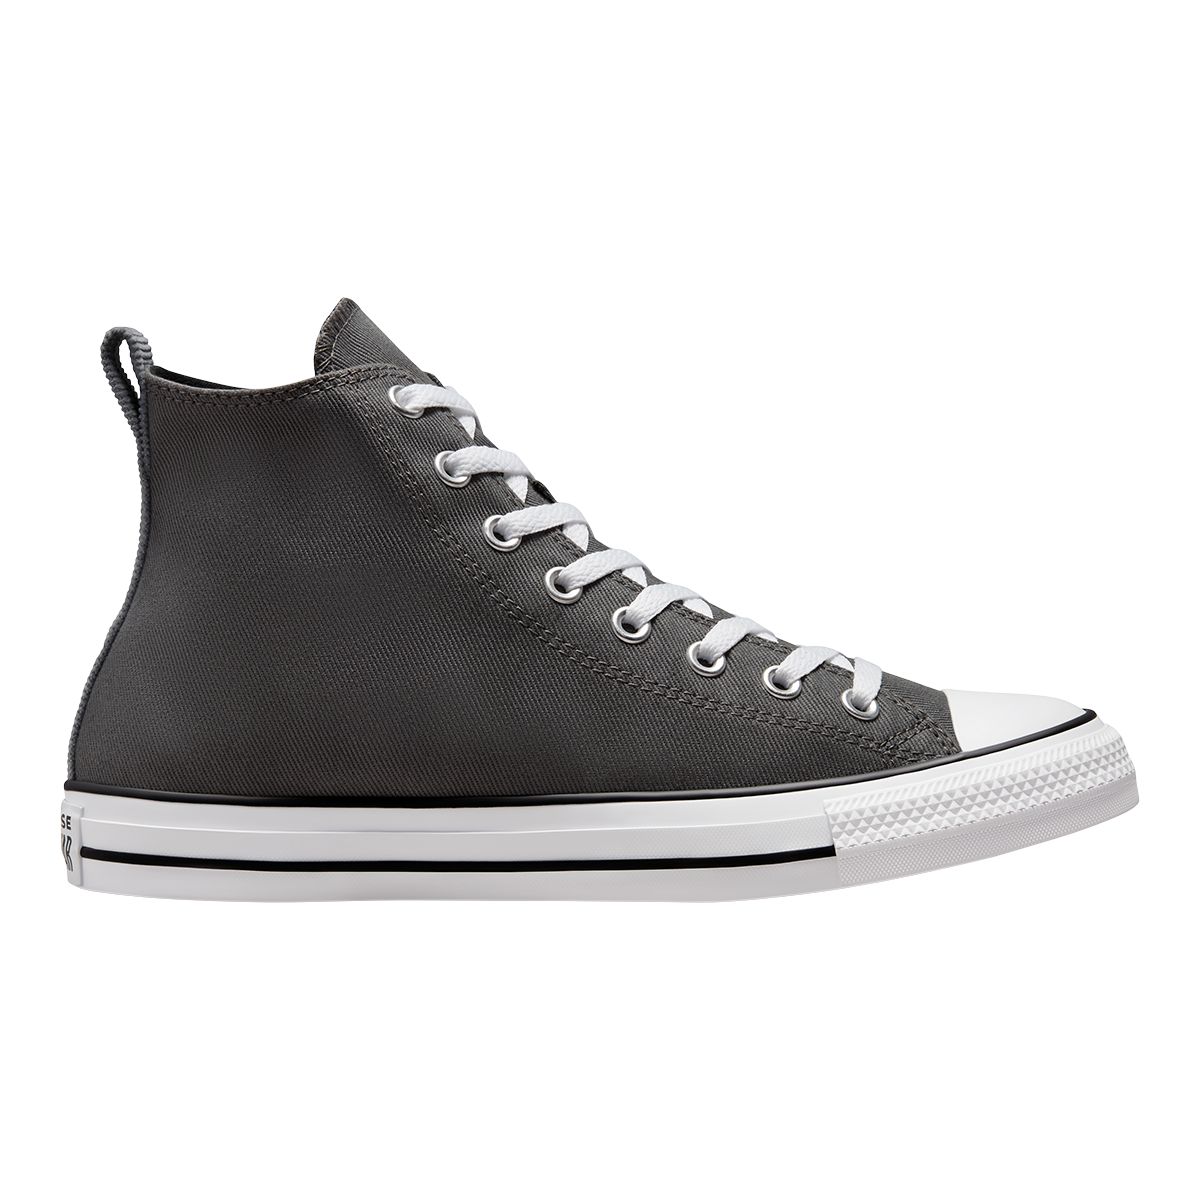 Image of Converse Men's Chuck Taylor All Star Workwear High Top Sneaker